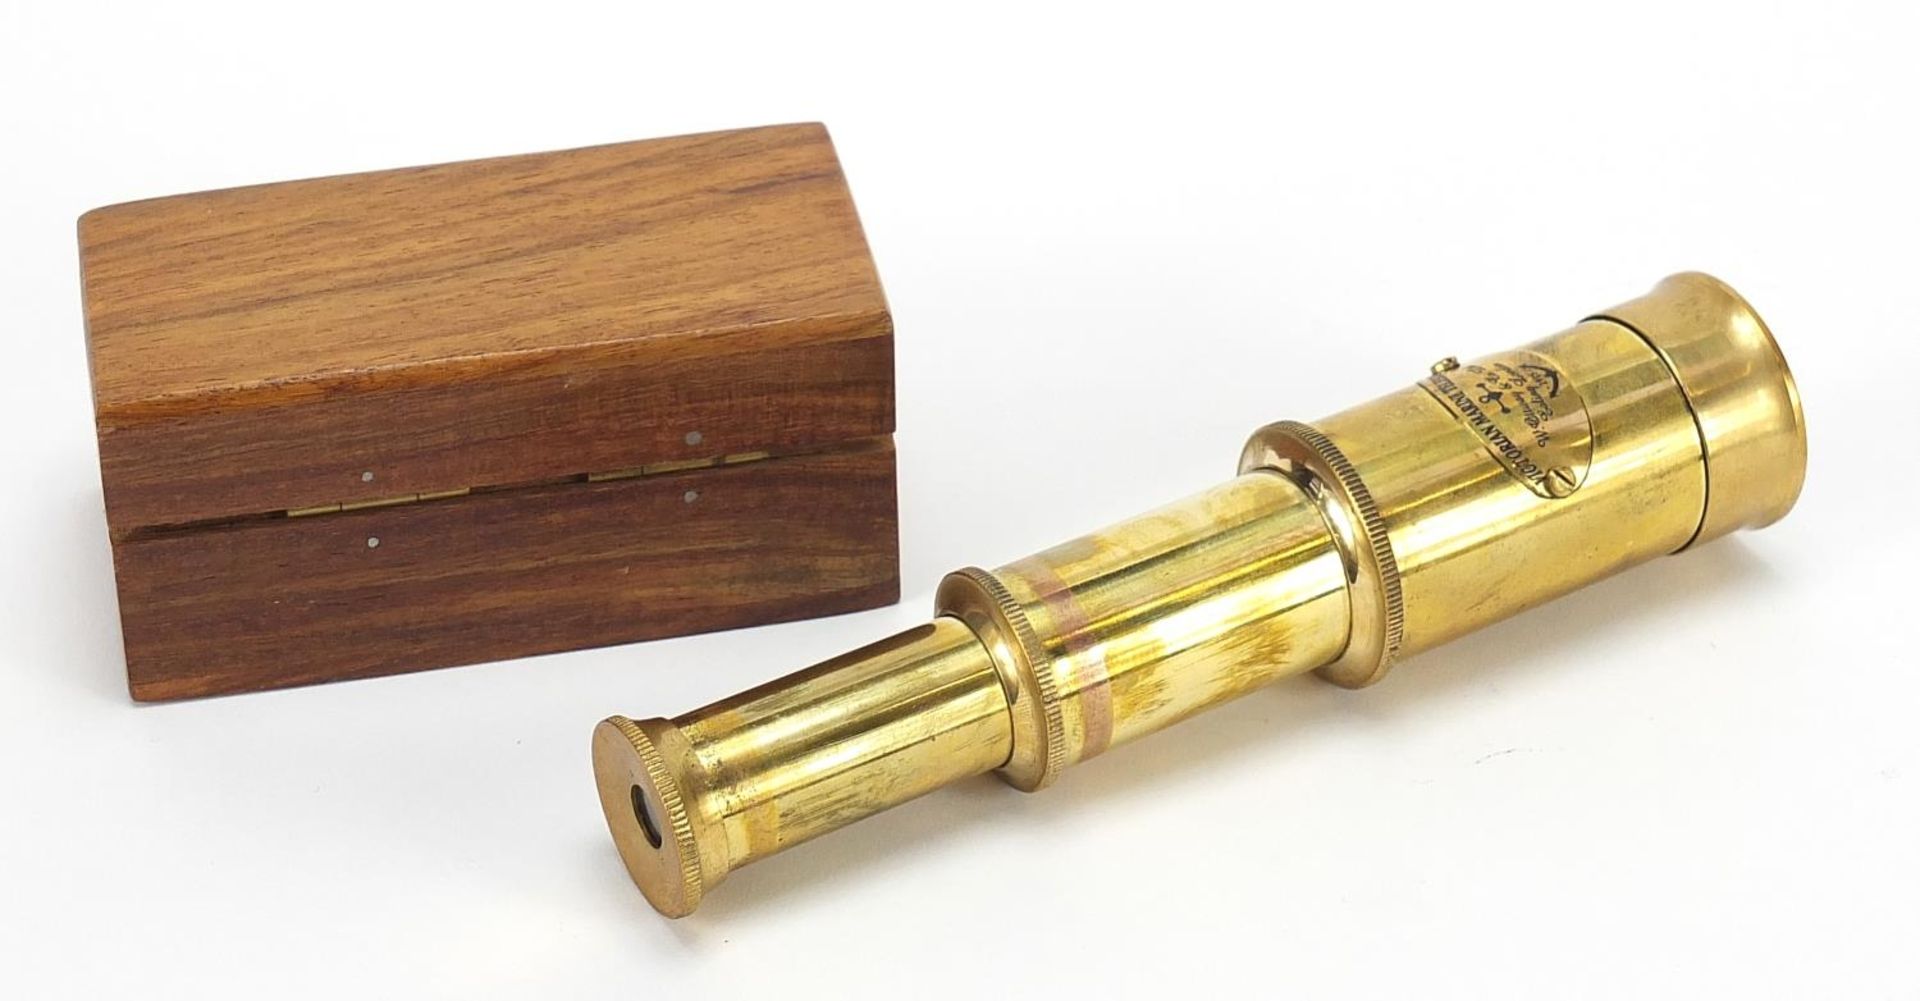 Naval interest marine two draw brass telescope with hardwood case, 8cm in length when closed - Image 2 of 2